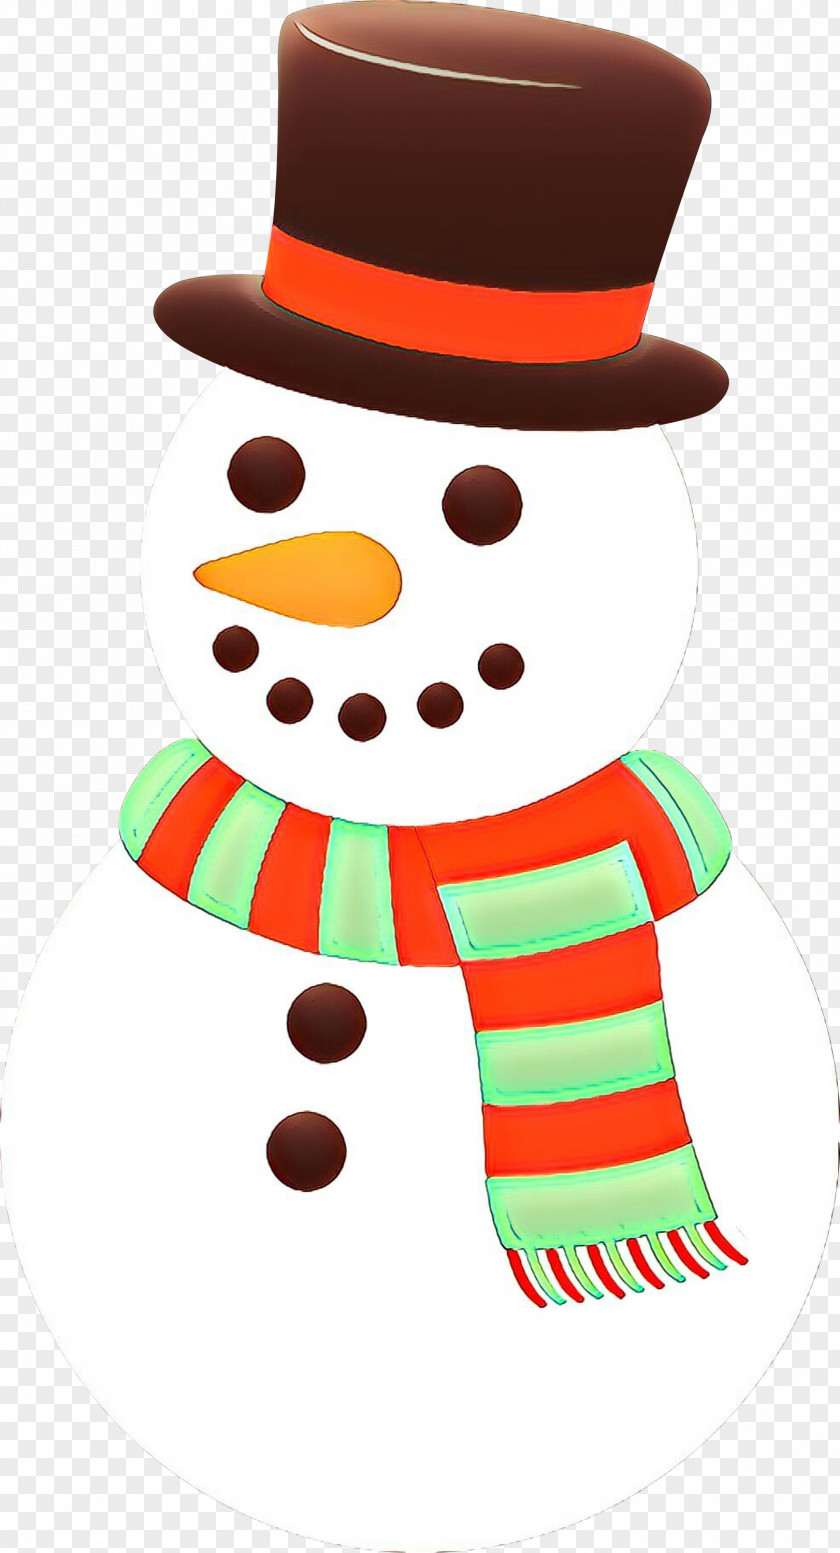 Snowman Christmas Day Clip Art Illustration Vector Graphics PNG